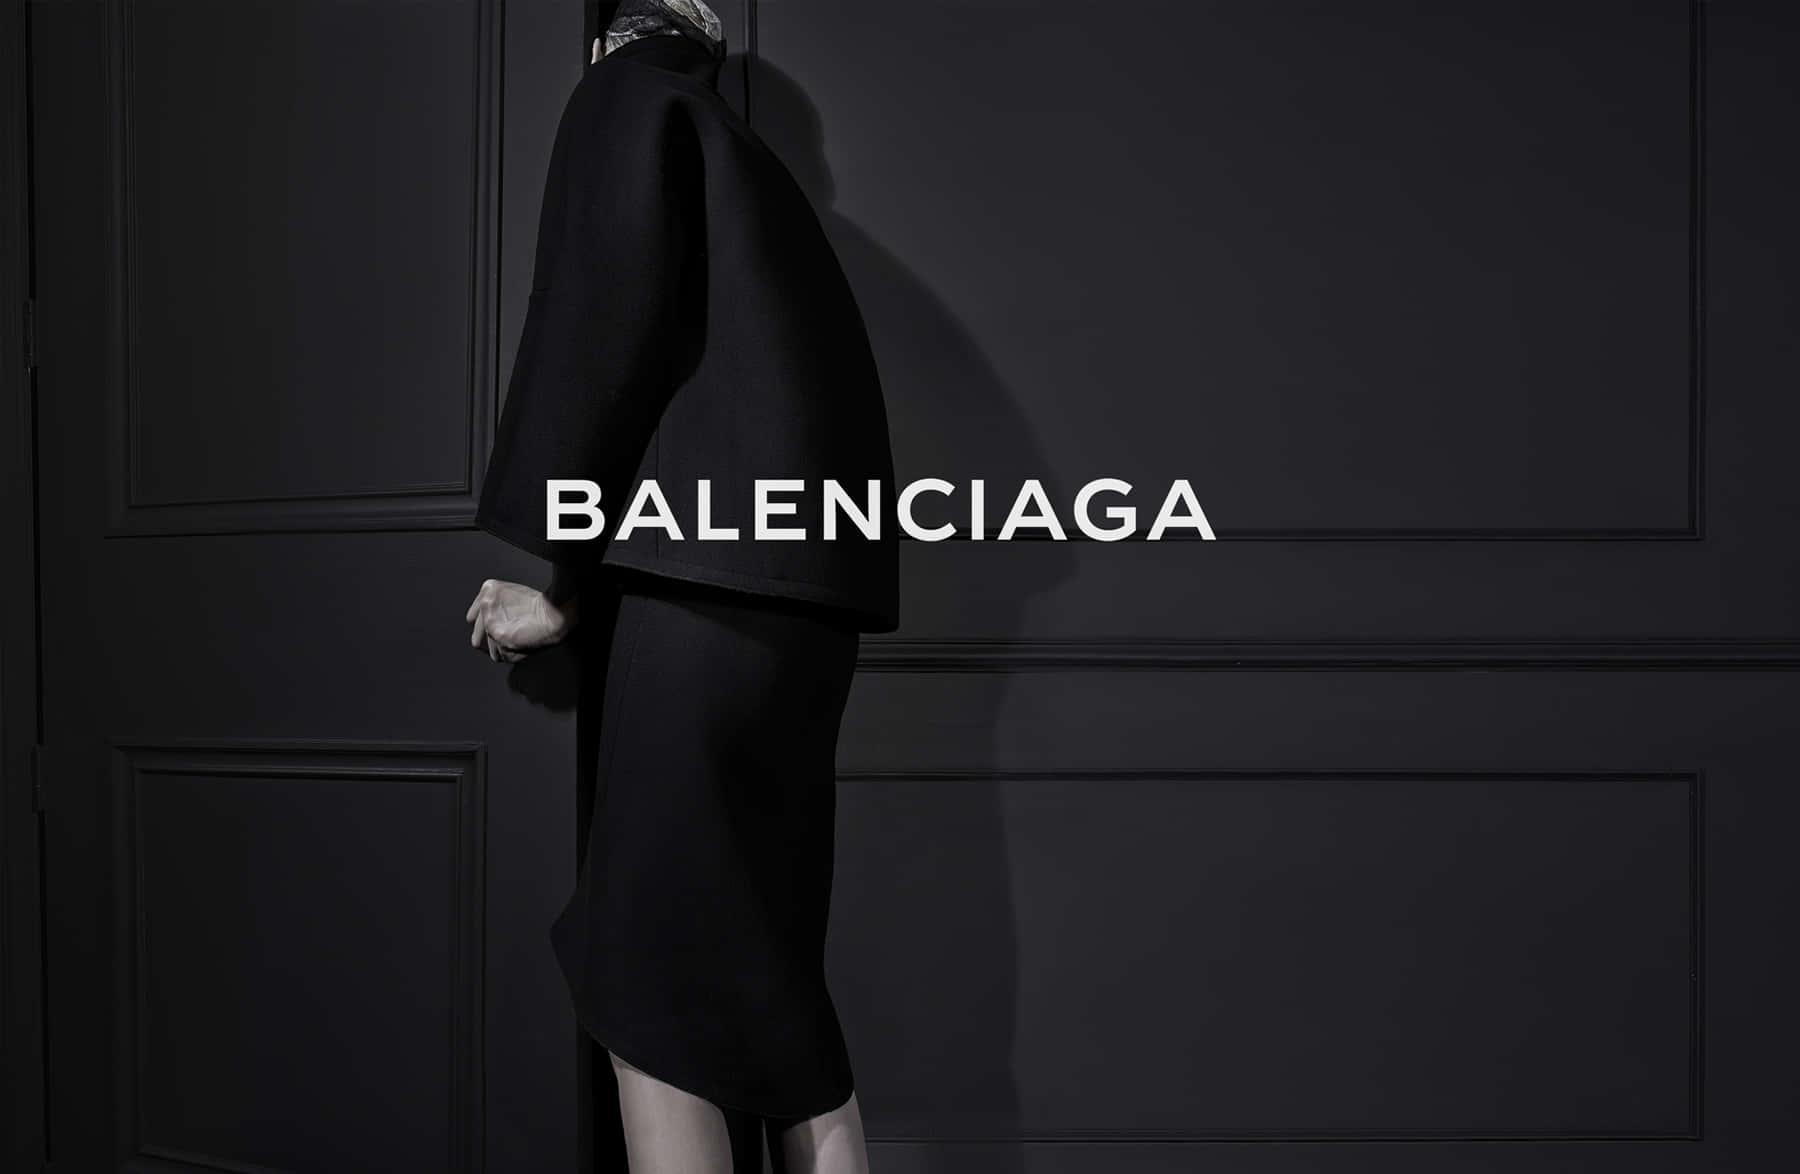 Get ready to break the rules with Balenciaga